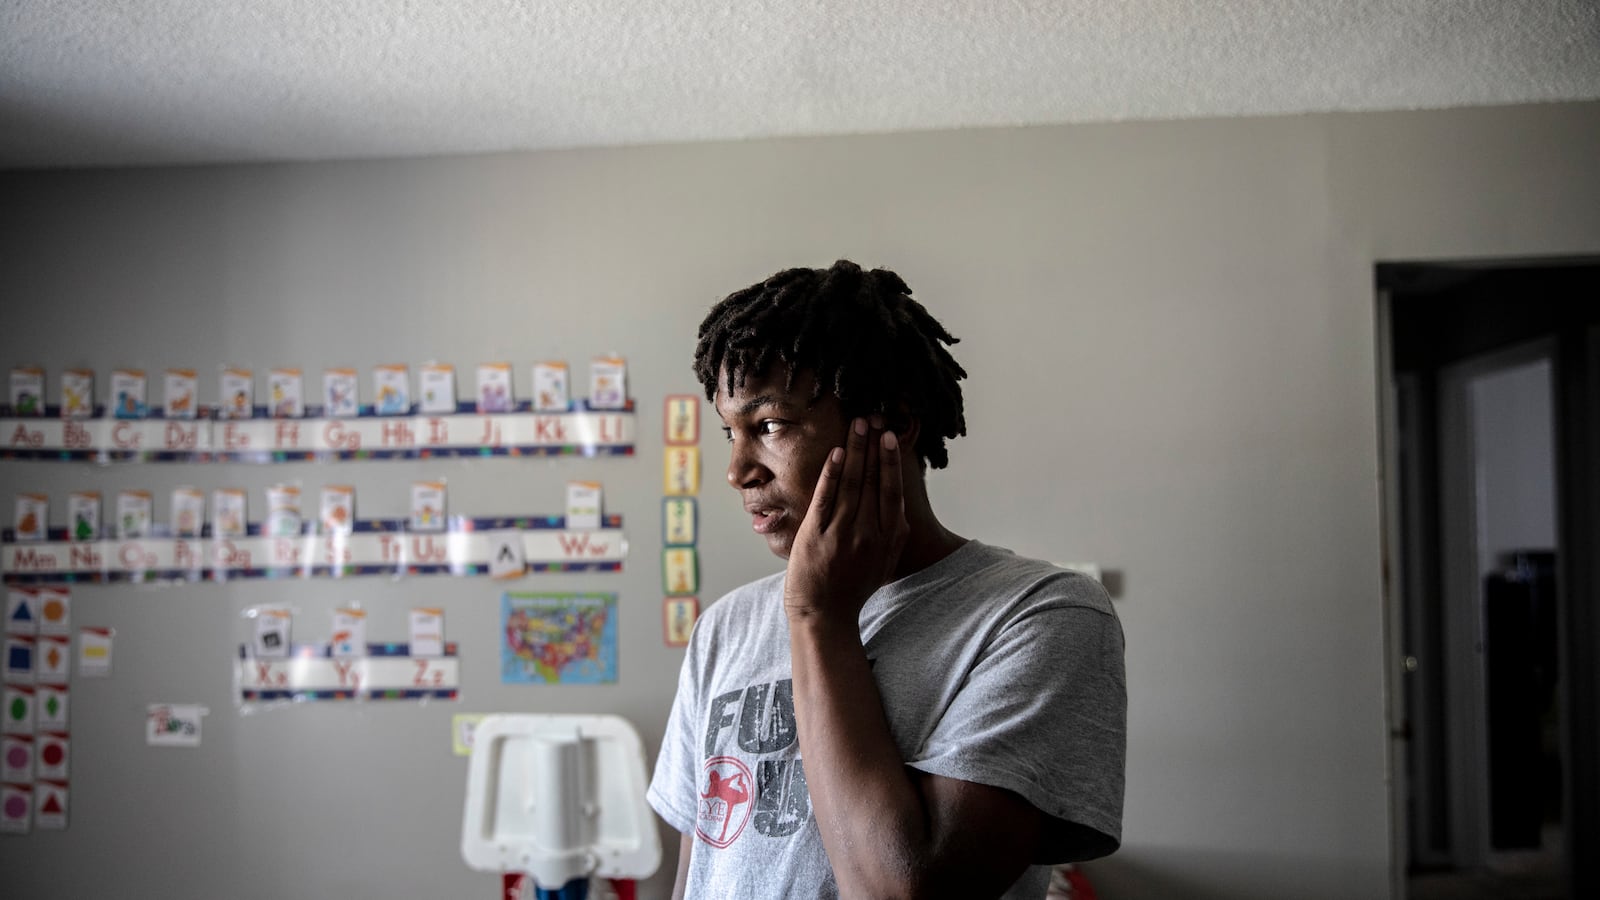 MEMPHIS, TN - March 16, 2021: Jalan Clemmons, a freshman at Hamilton High School, stands in his living room while at home during a virtual school day. His mother, Anna Nuby, works from home and he also lives with his 2-year-old brother Kobi.